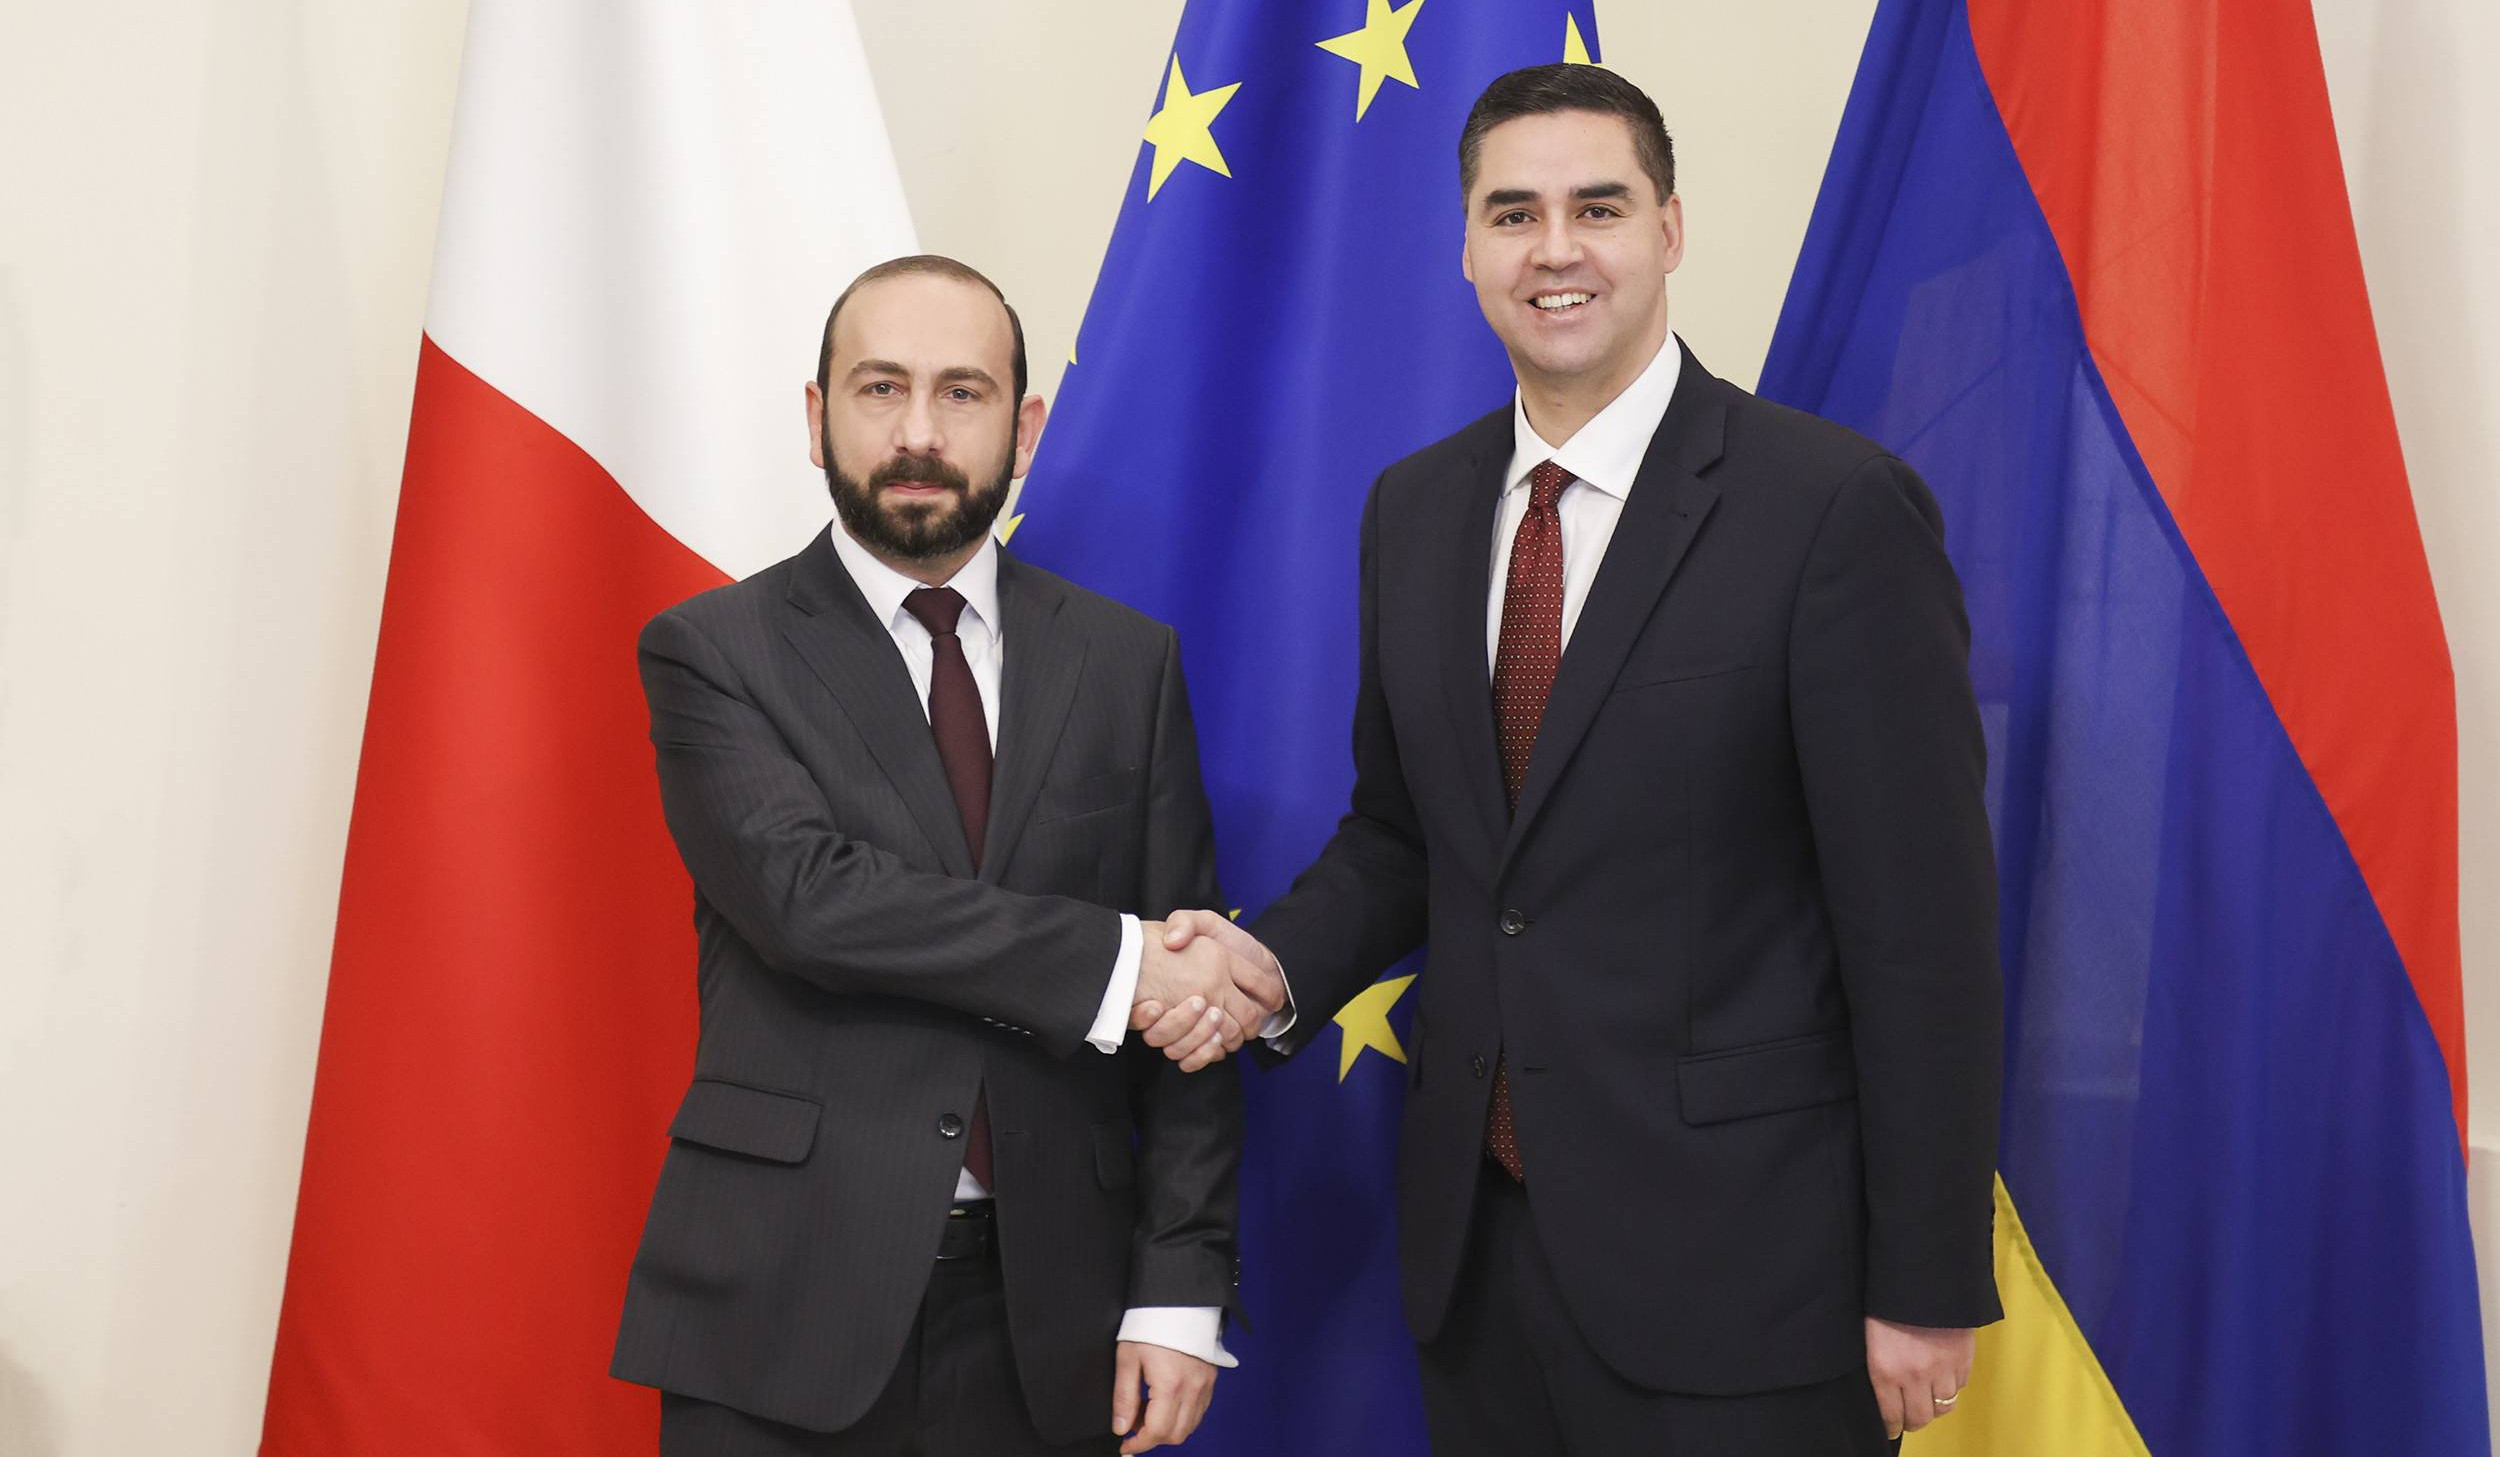 Armenia, Malta Foreign Ministers emphasize need to settle existing issues exclusively through peaceful negotiations